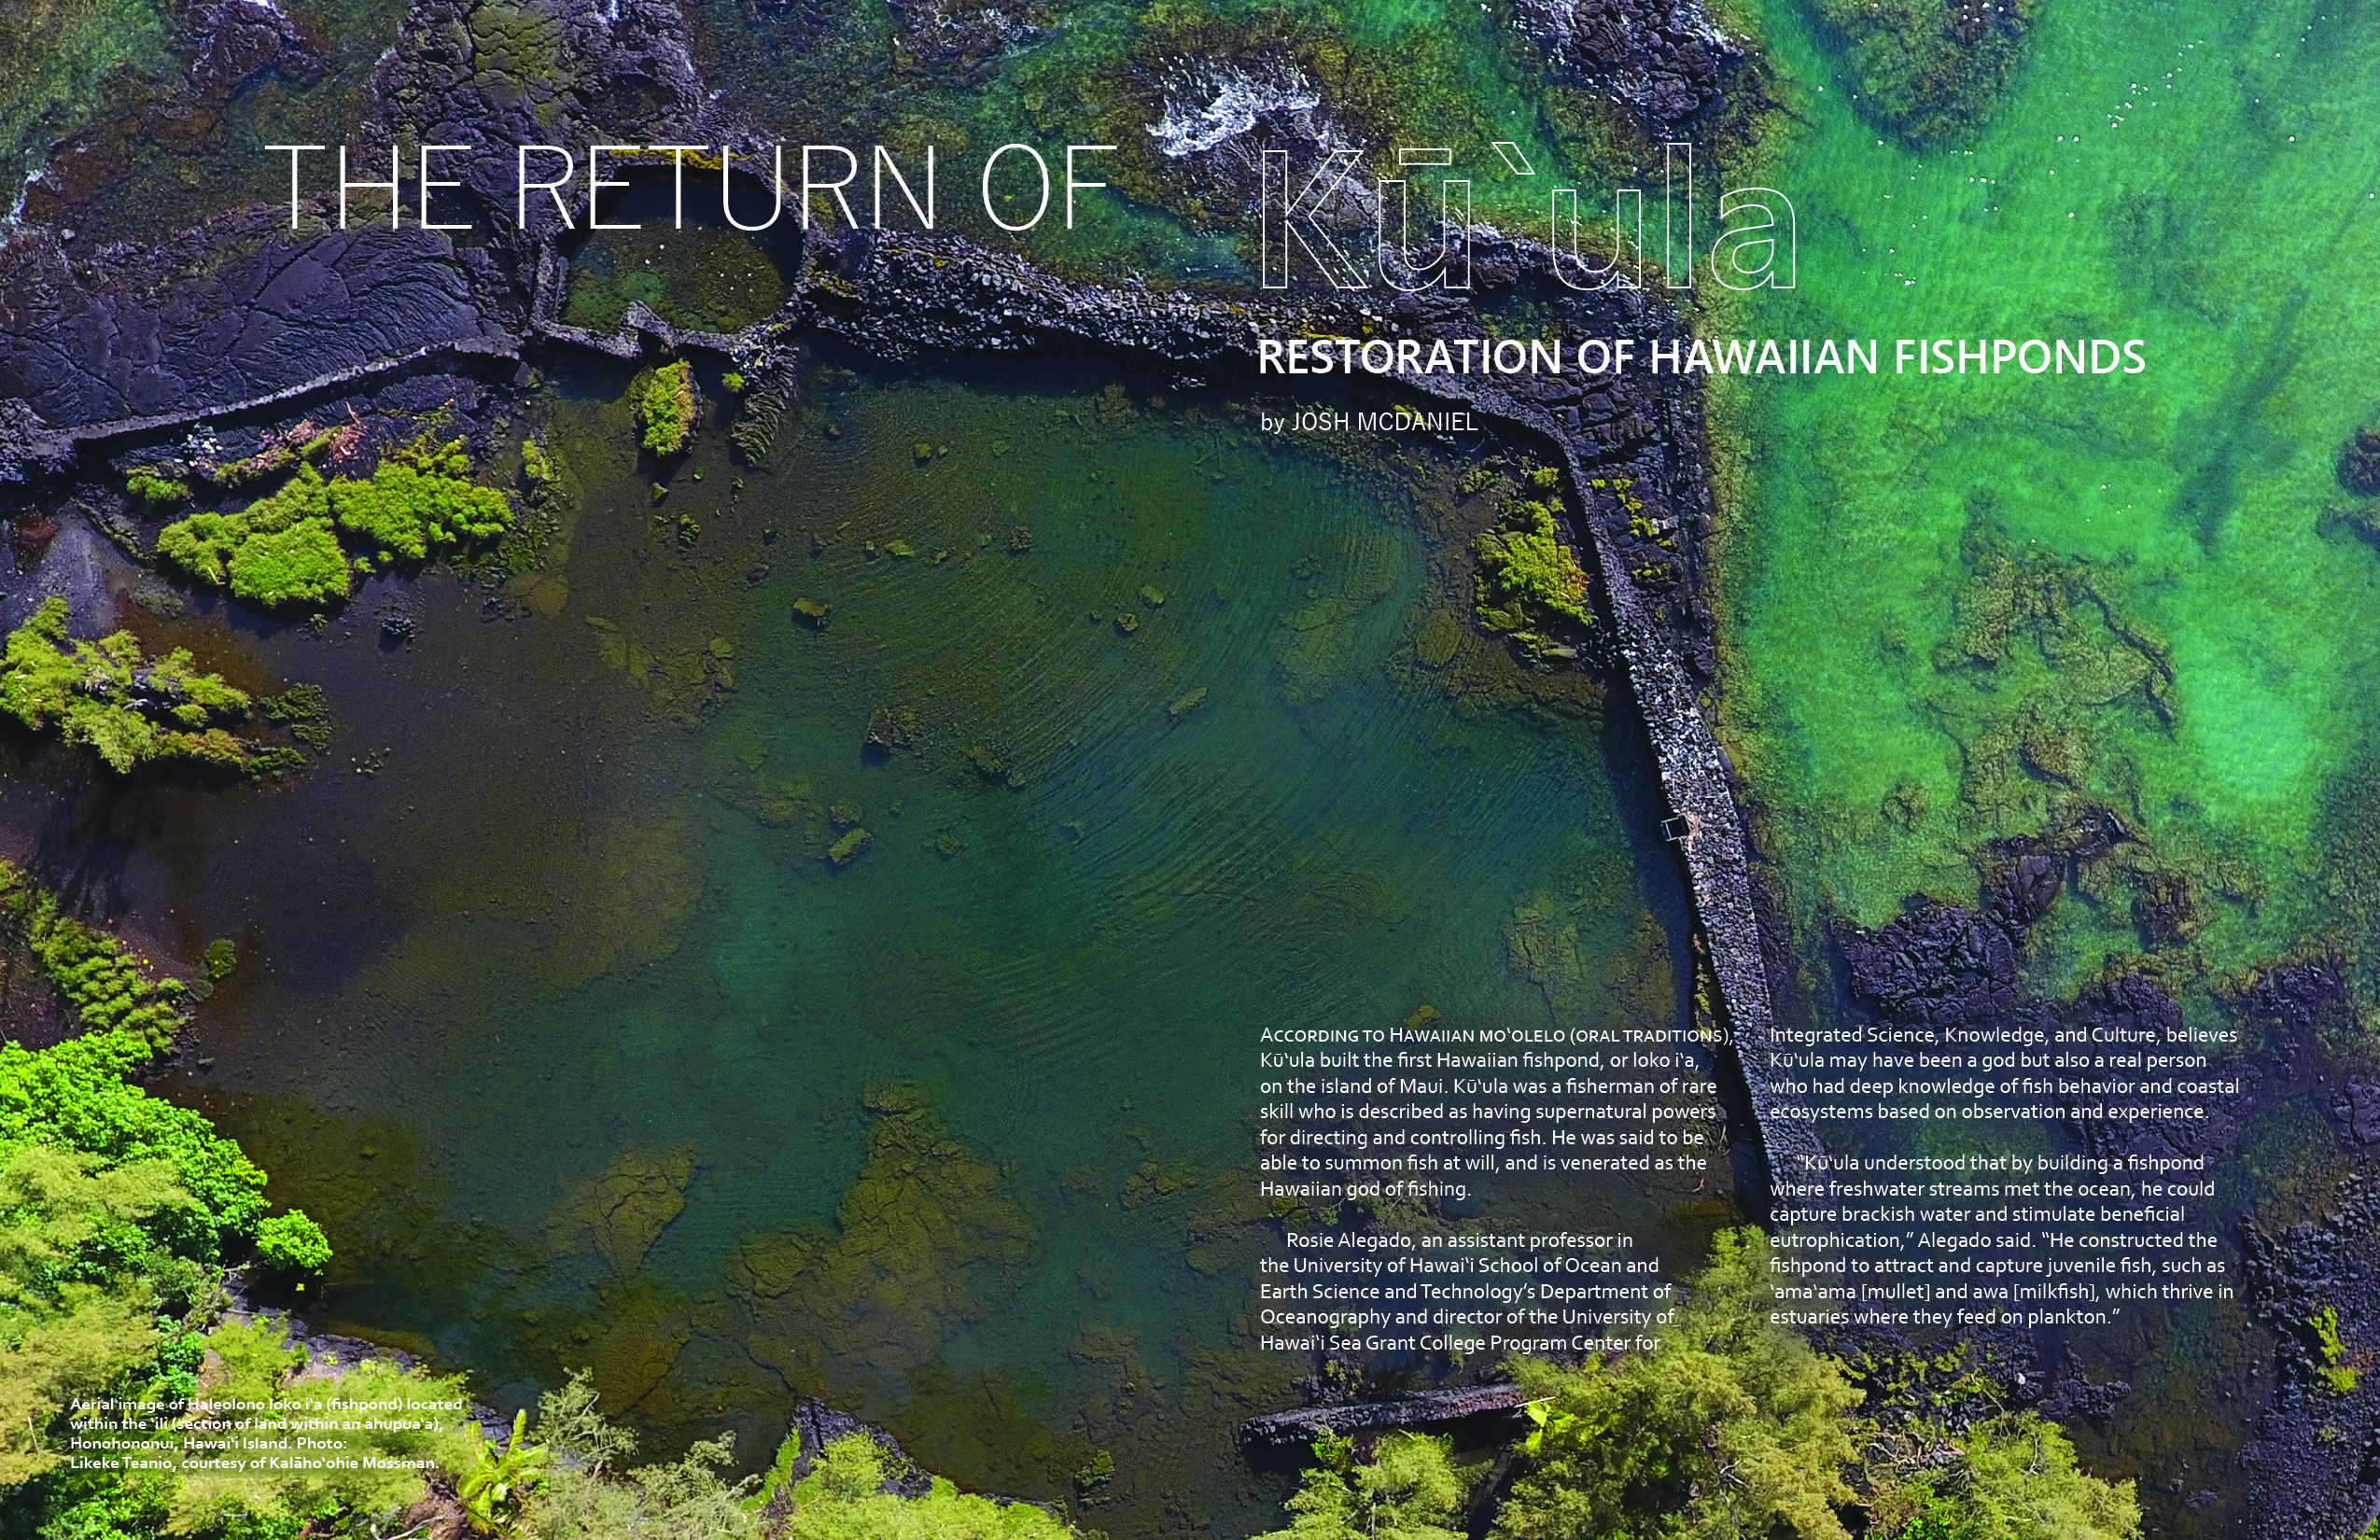 First page of article with large aerial photo of Hawaii Island fishpond and wall